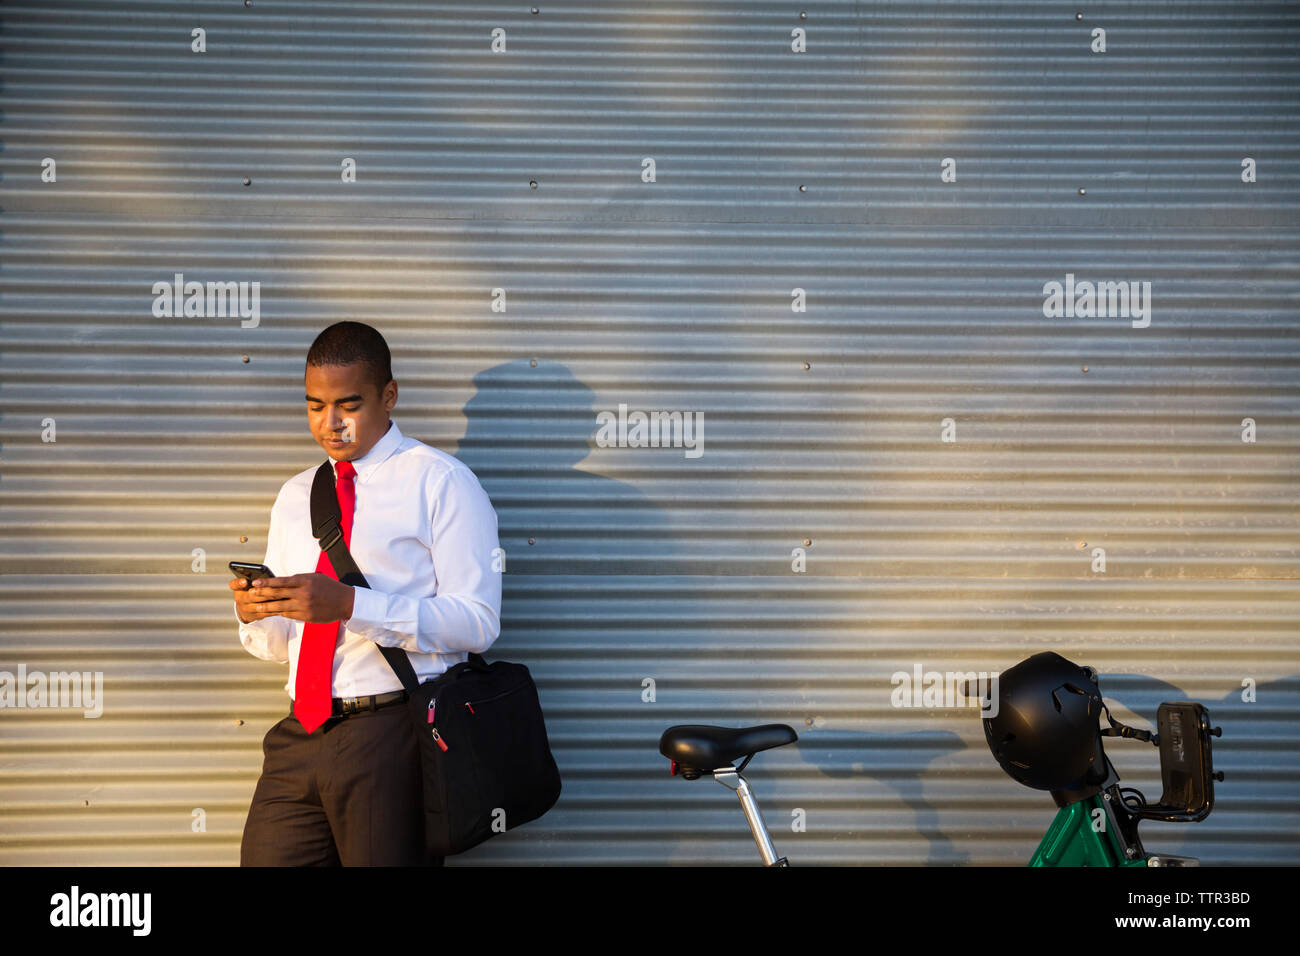 businessman using mobile phone while standing against closed shutter Stock Photo